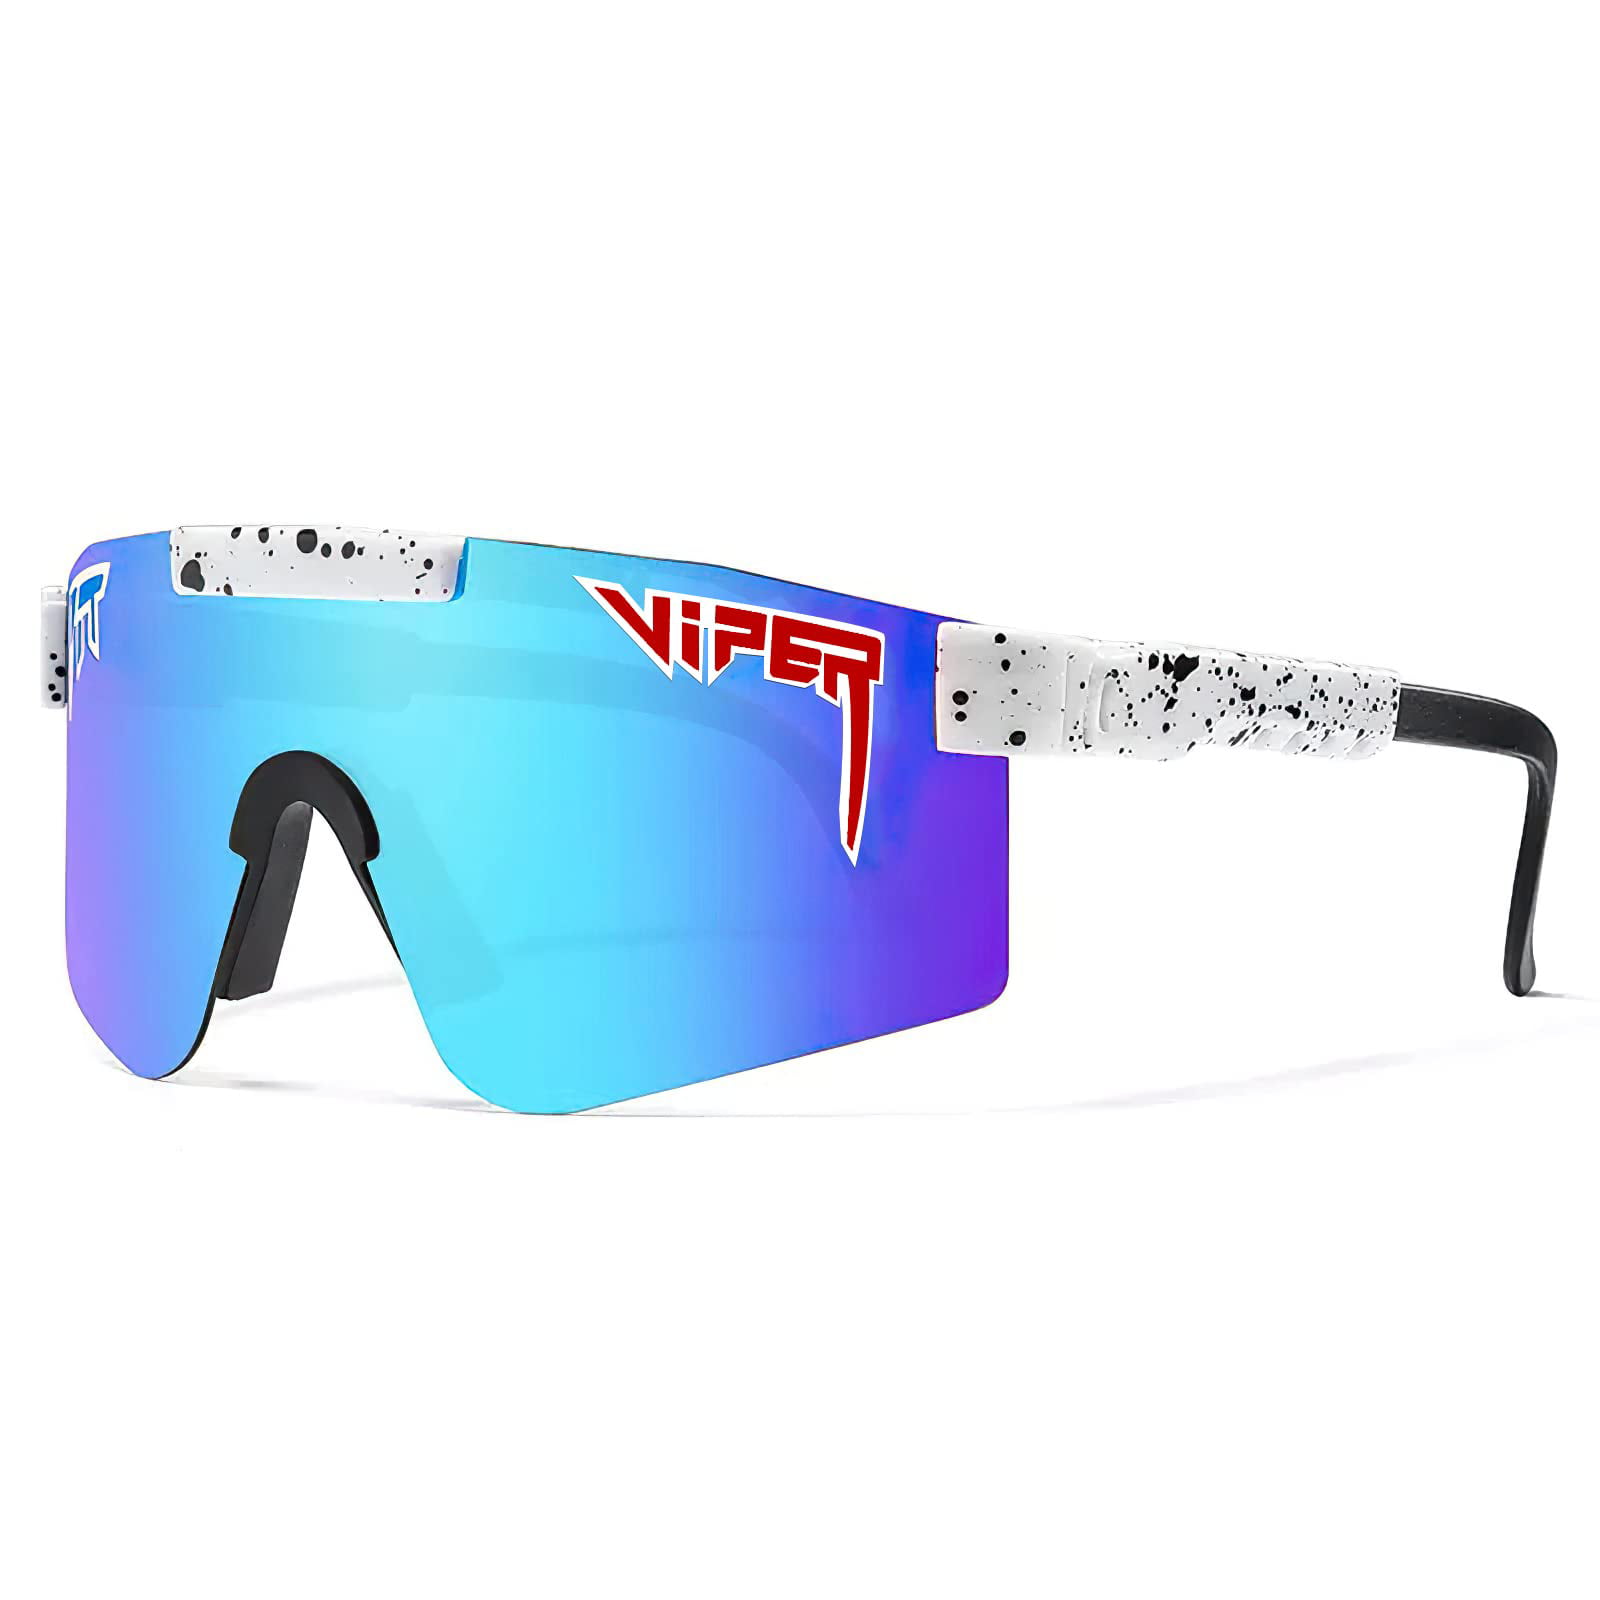 Pit-Viper Uv400 Viper Sunglasses for Men and Women Polarized Glasses Outdoor Cycling-C10